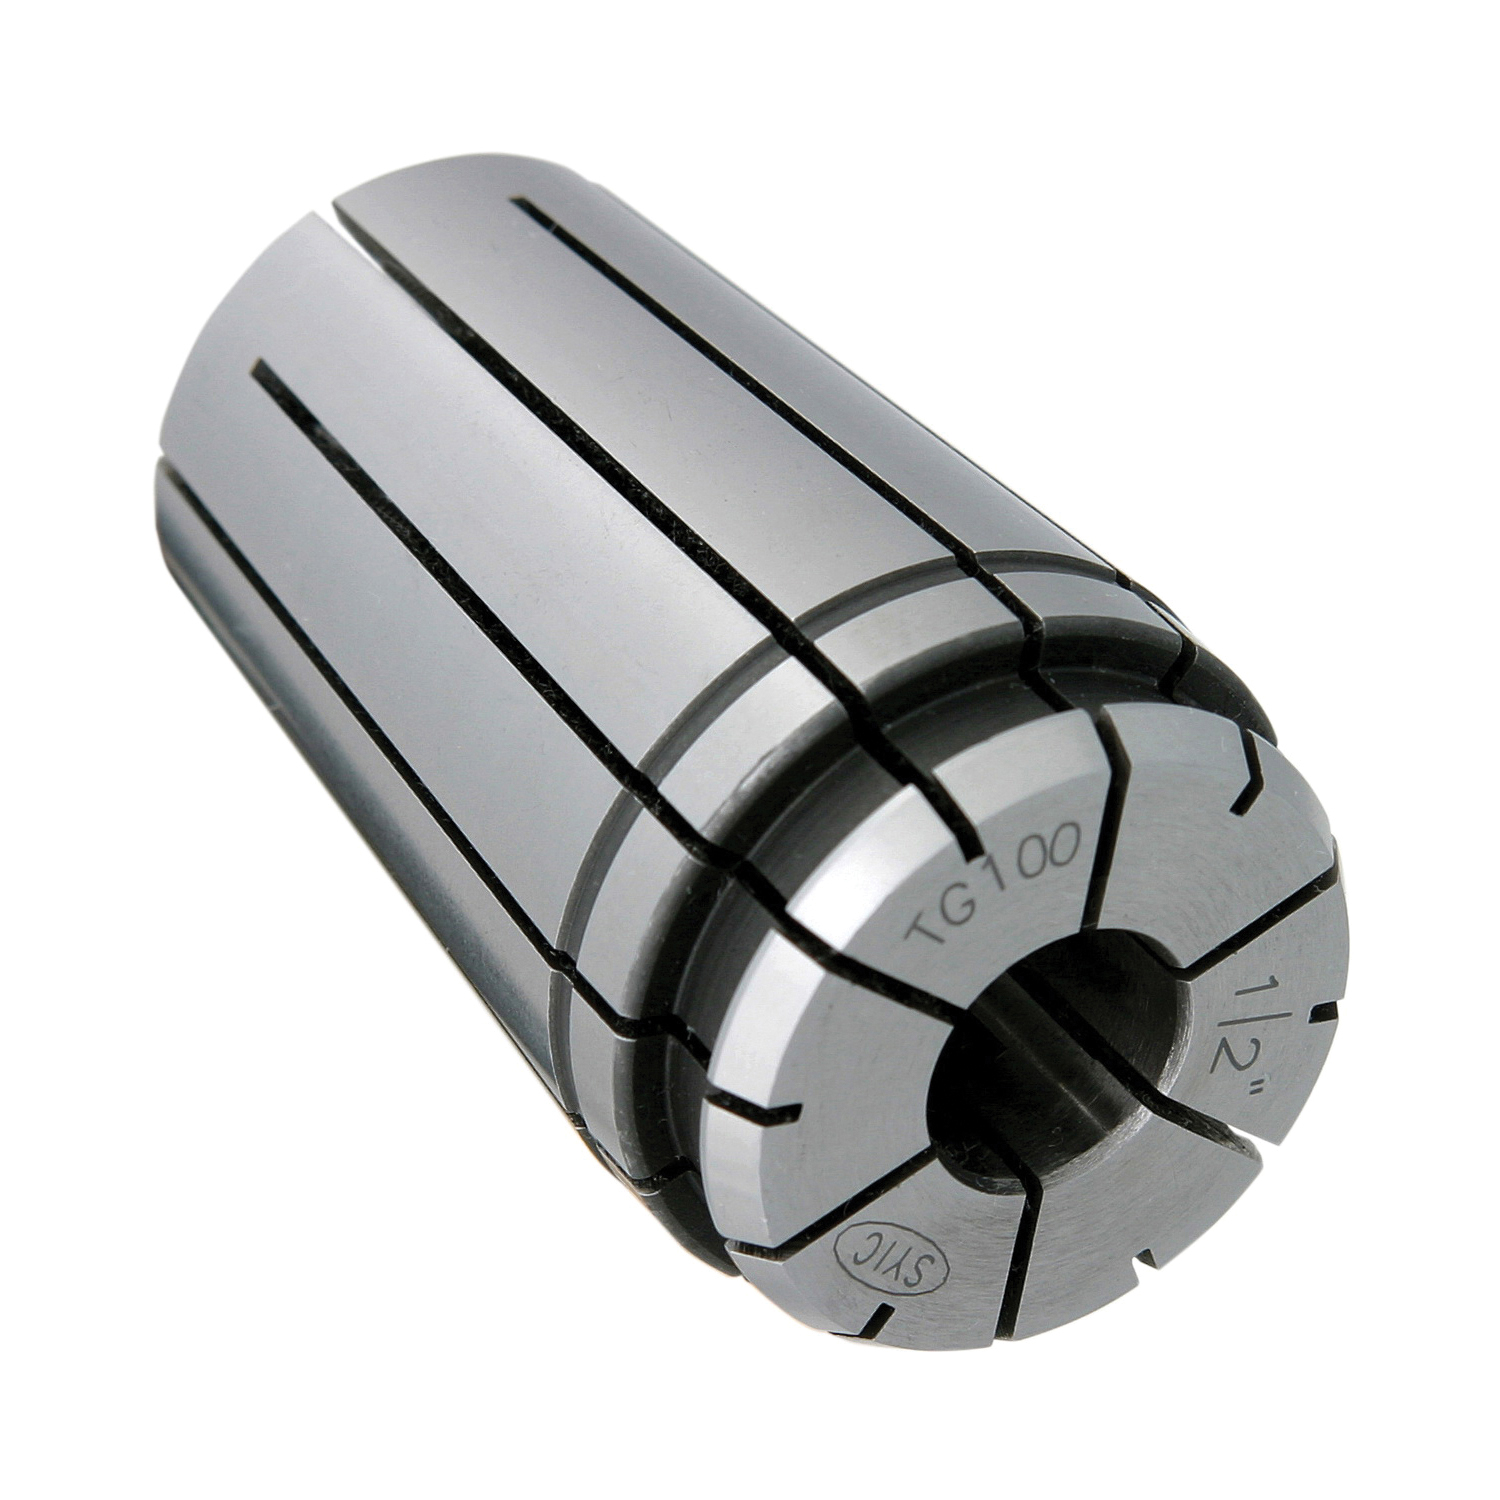 TG100 63/64" COLLET